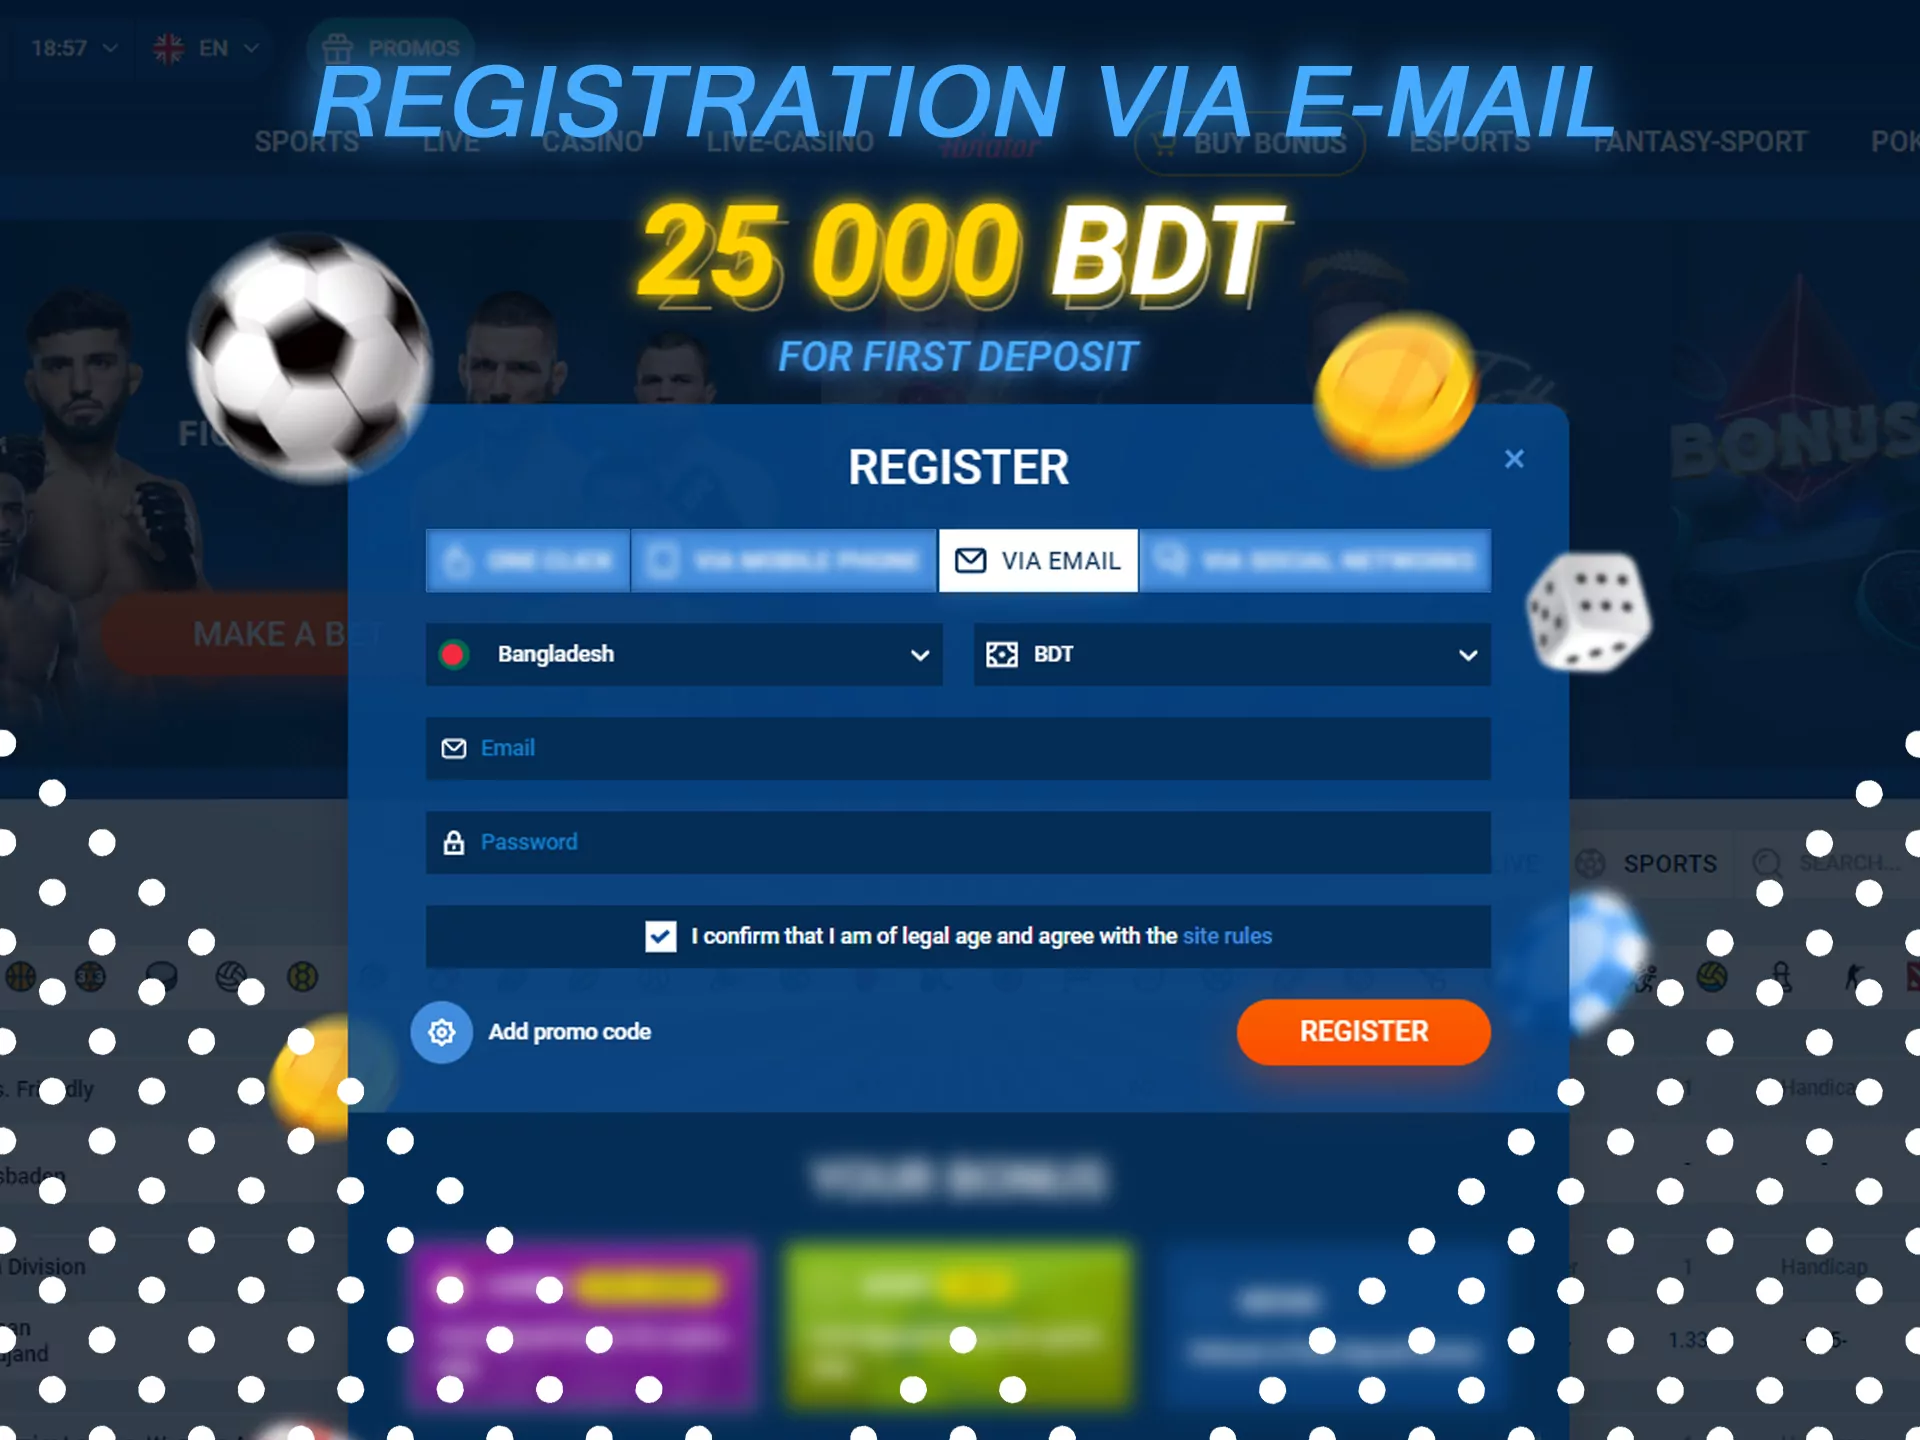 You can registrate at Mostbet with your email.